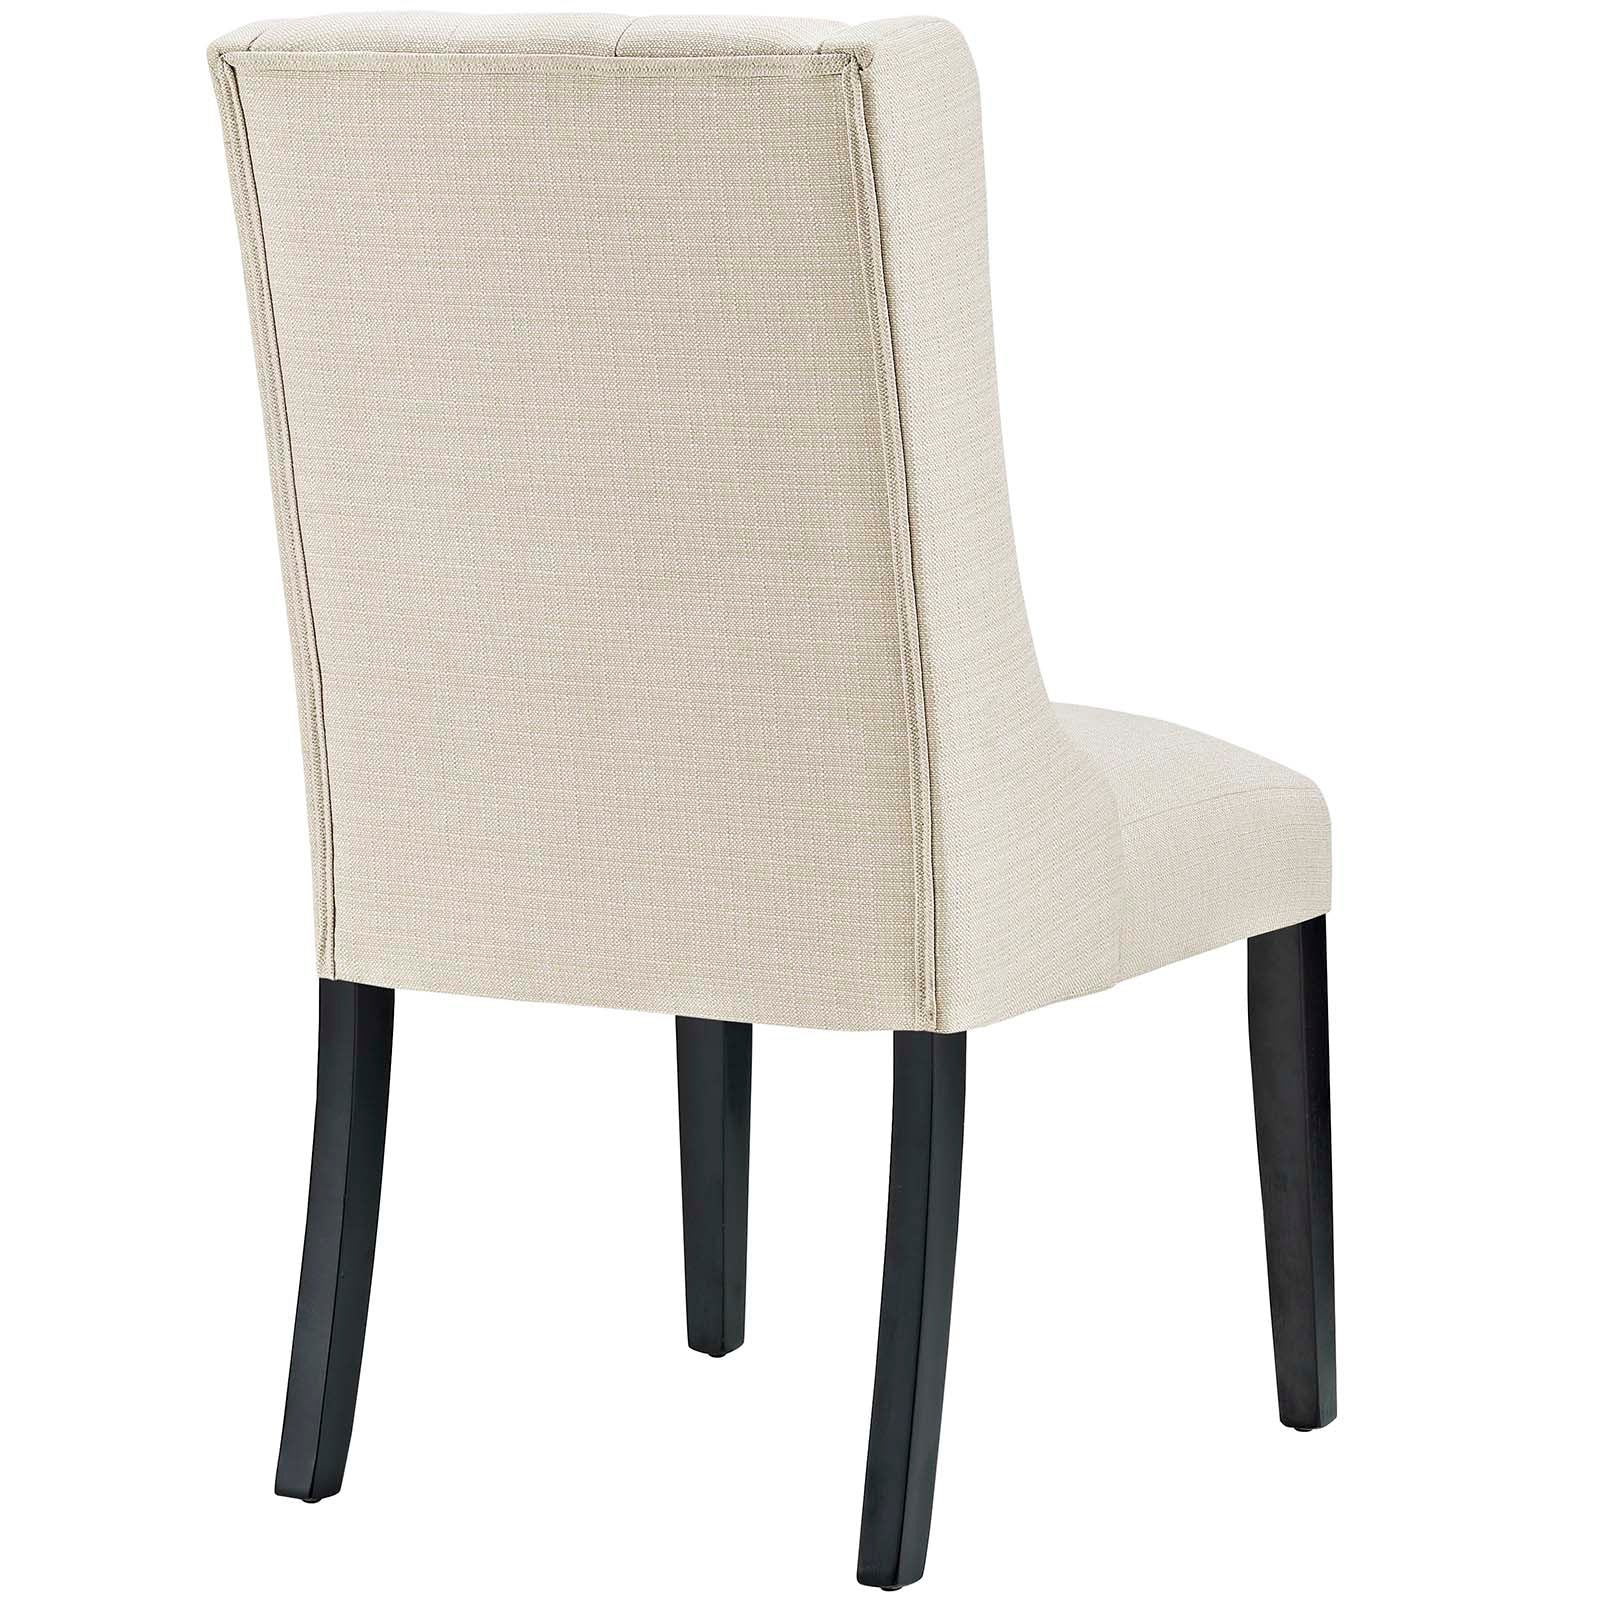 Baronet Dining Chair Fabric Set of 4-Dining Chair-Modway-Wall2Wall Furnishings